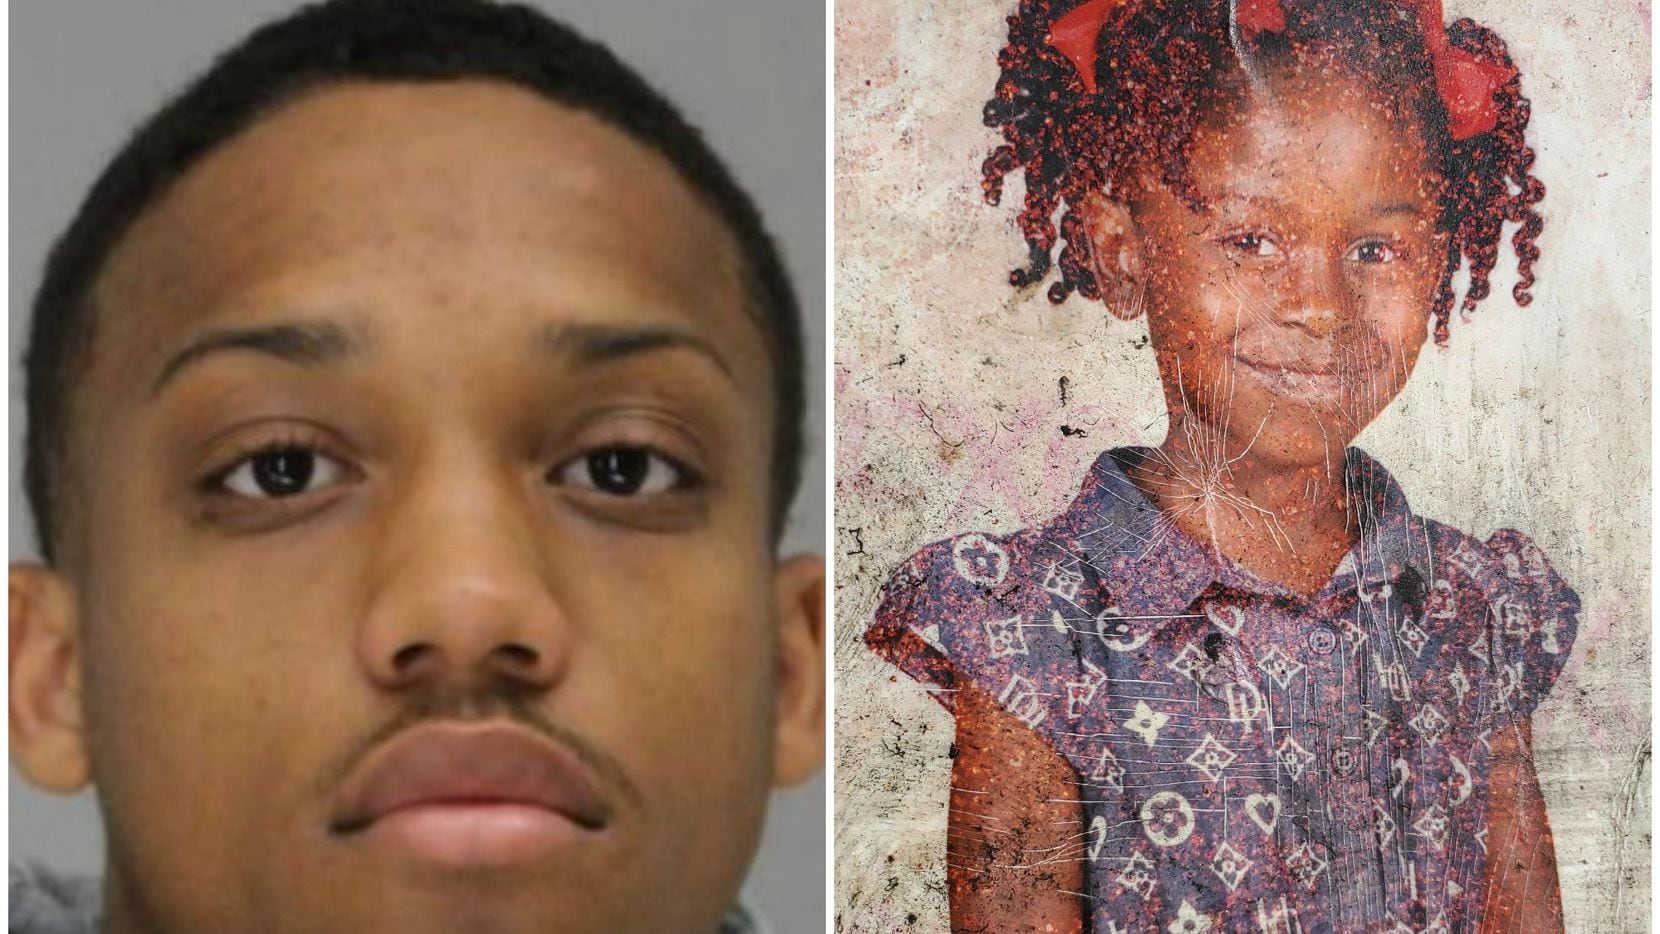 Tyrese Simmons was named as a suspect in the death of 9-year-old Brandoniya Bennett. Police suspect Simmons was gunning or a rival rapper when he allegedly fired into the girl's home.